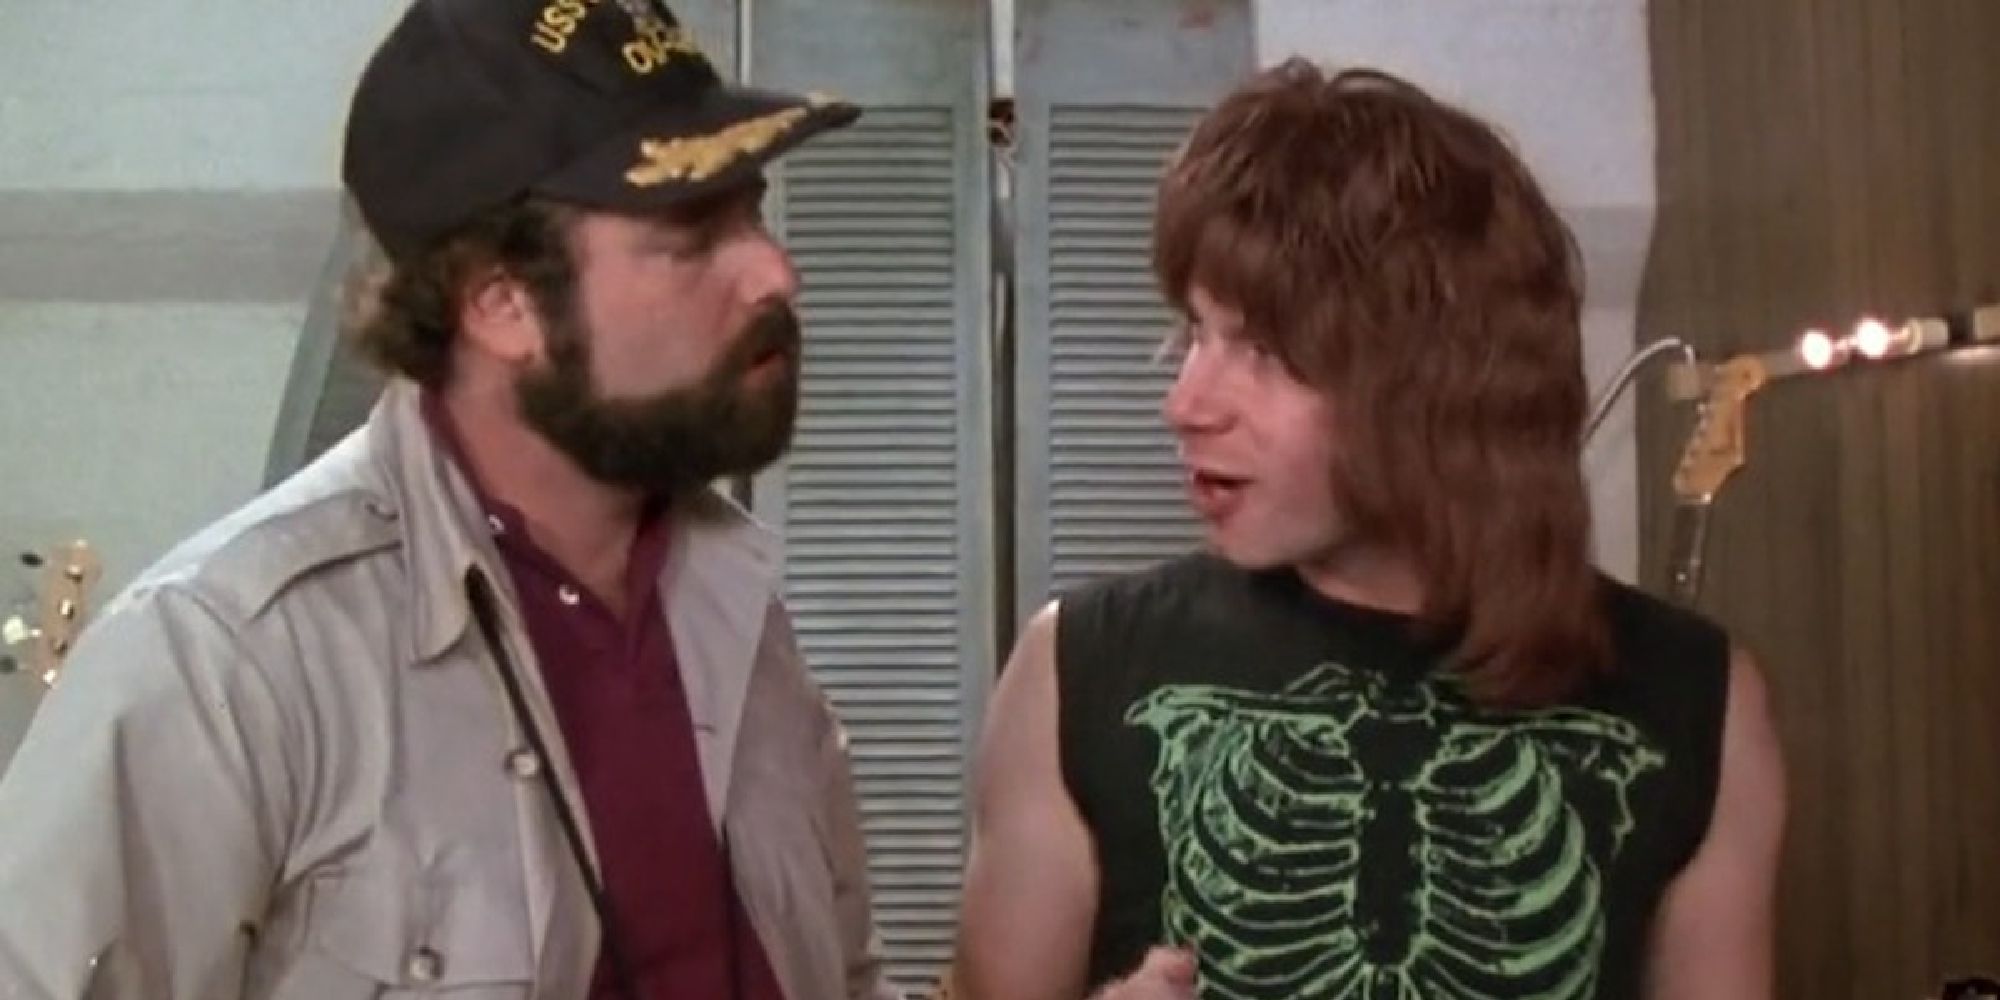 Nigel showing off his amps to Marty Di Bergi in This Is Spinal Tap